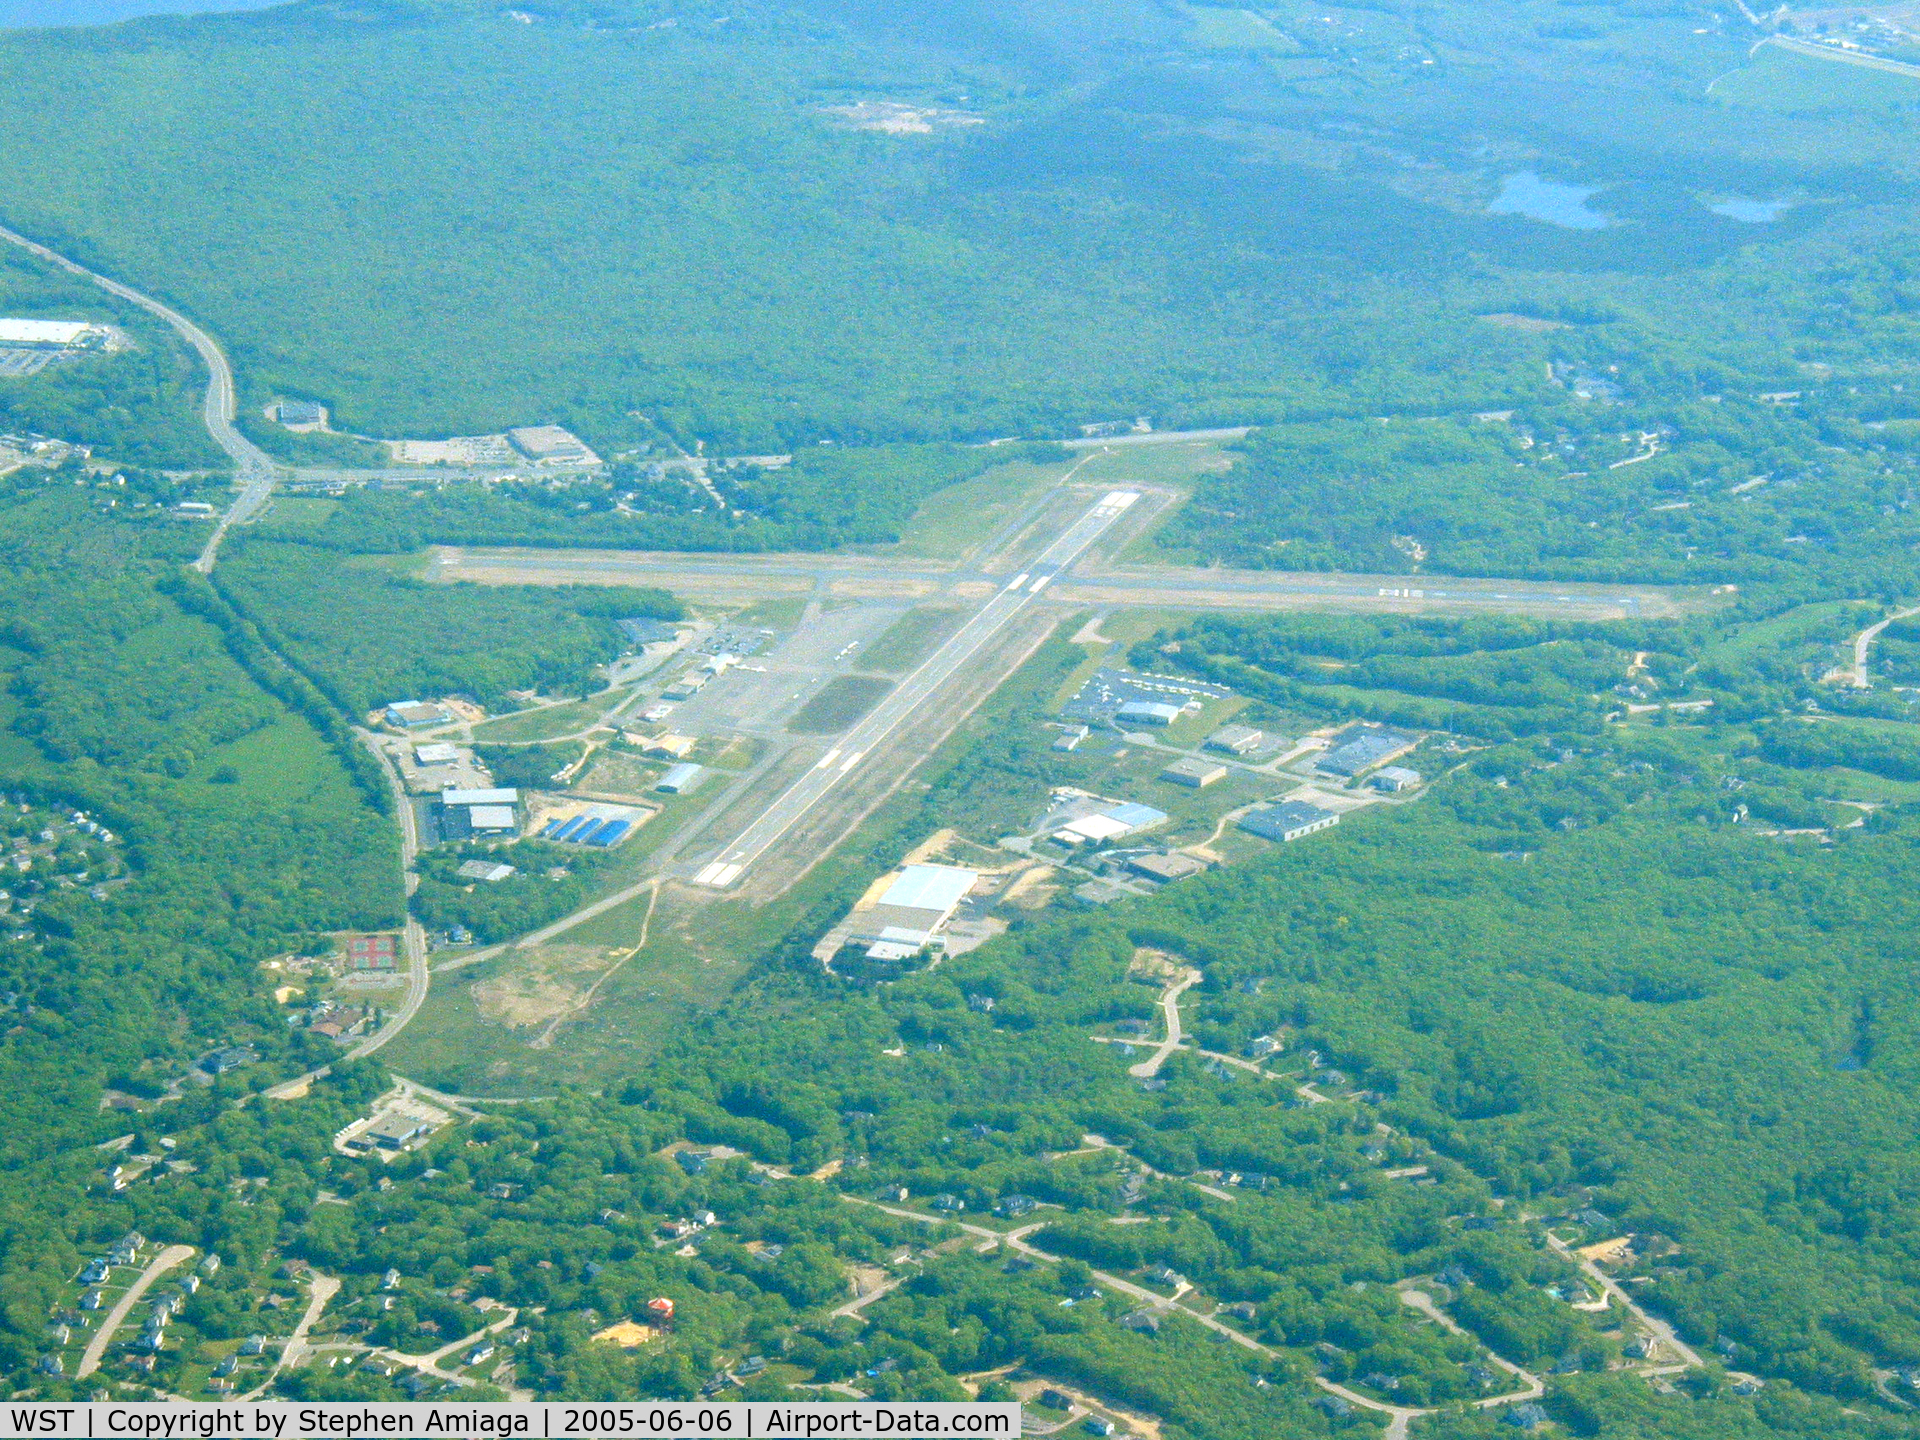 Westerly State Airport (WST) - Westerly State